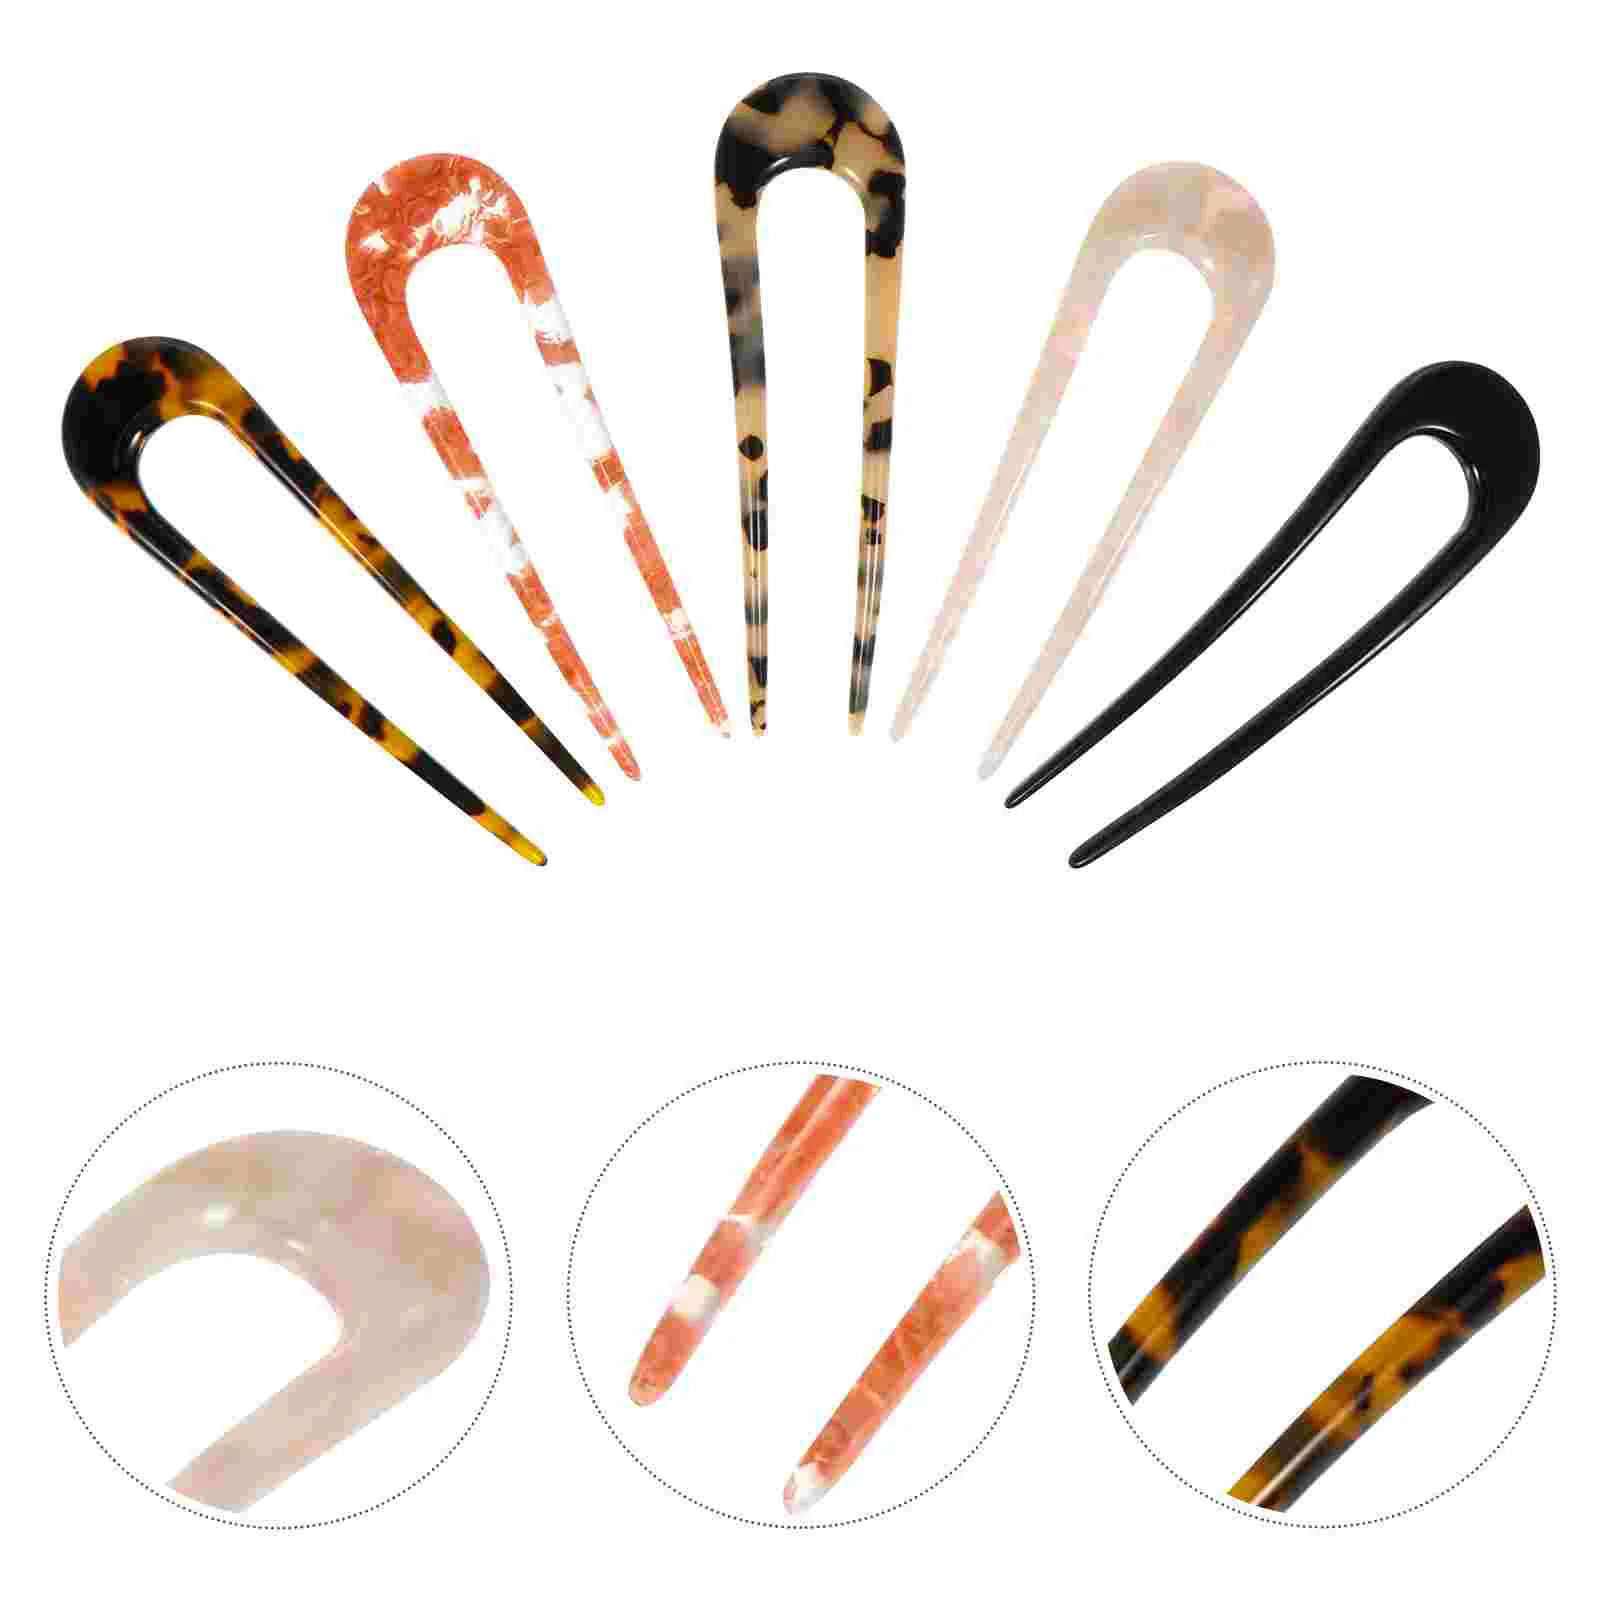 

U-shaped Acetate Hairpin Clips Hairpins Girls Retro Women Lady Barrettes Sticks Vintage Forks Accessories